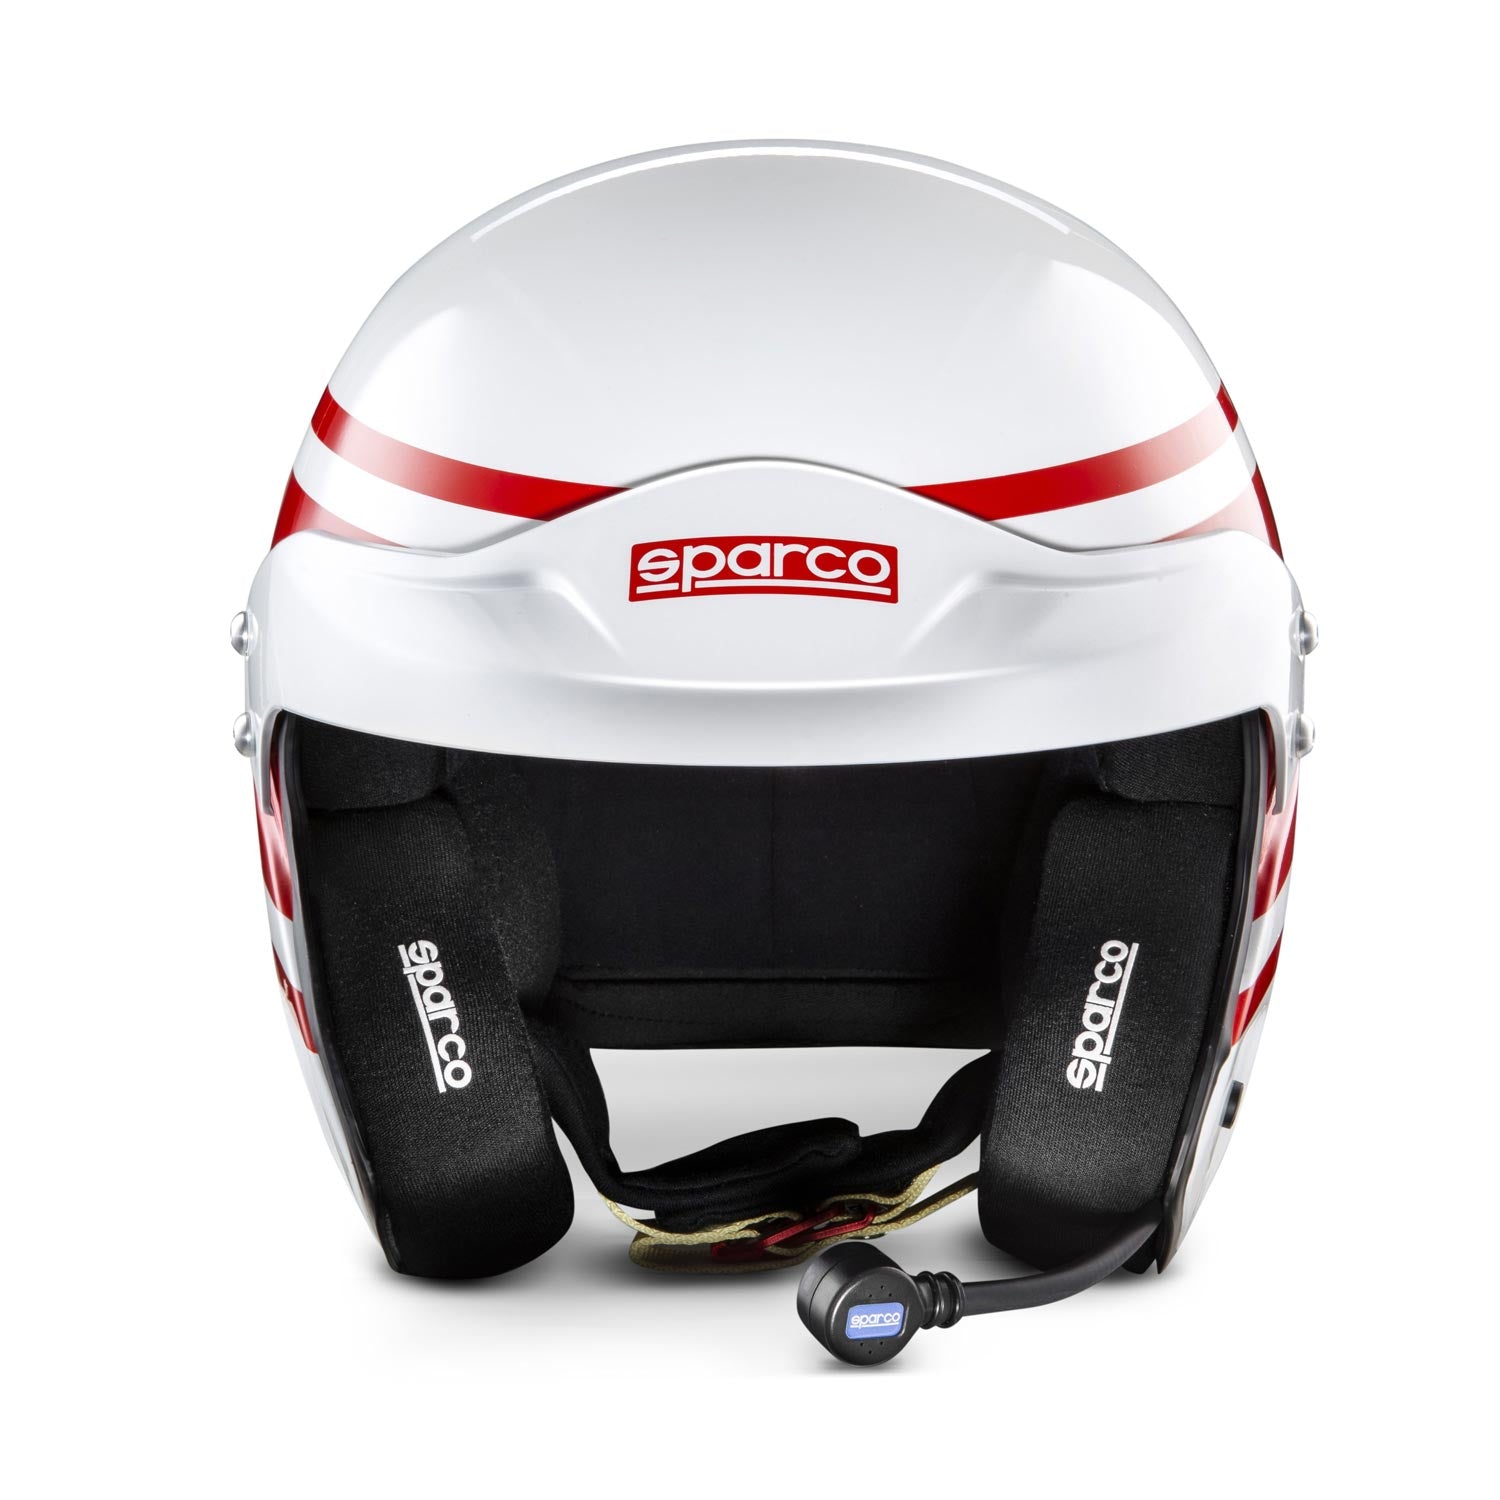 SPARCO 003369RS5XL RJ-i 1977 Racing helmet open-face, FIA/SNELL SA2020, red/white, size XL (61) Photo-2 